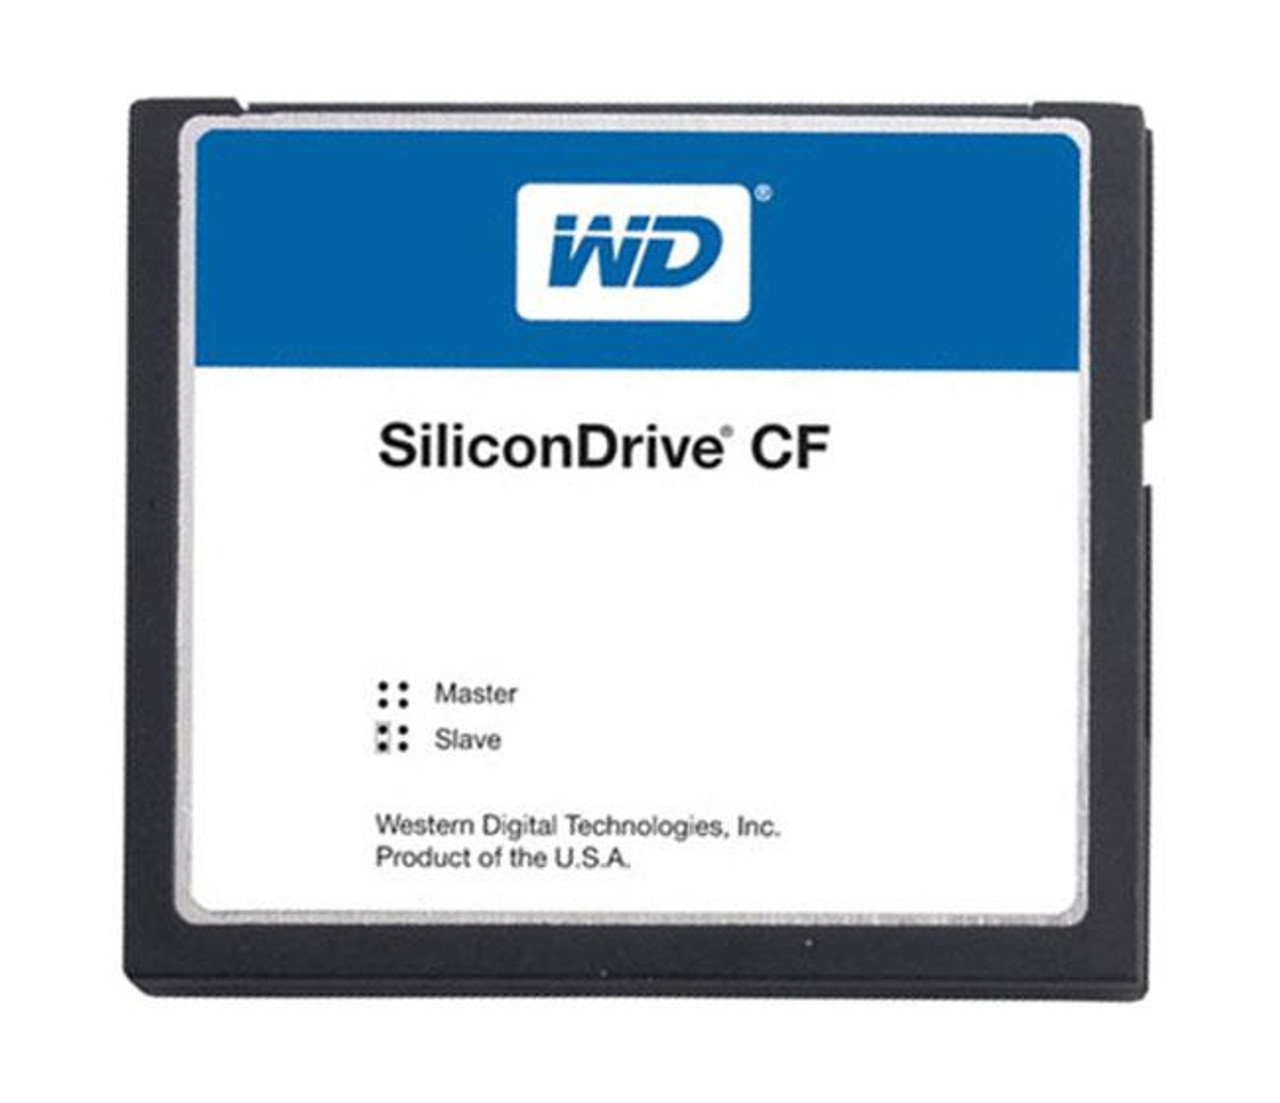 SSD-C64M-3576 Western Digital / IDE Drives 64MB Solid State Drive